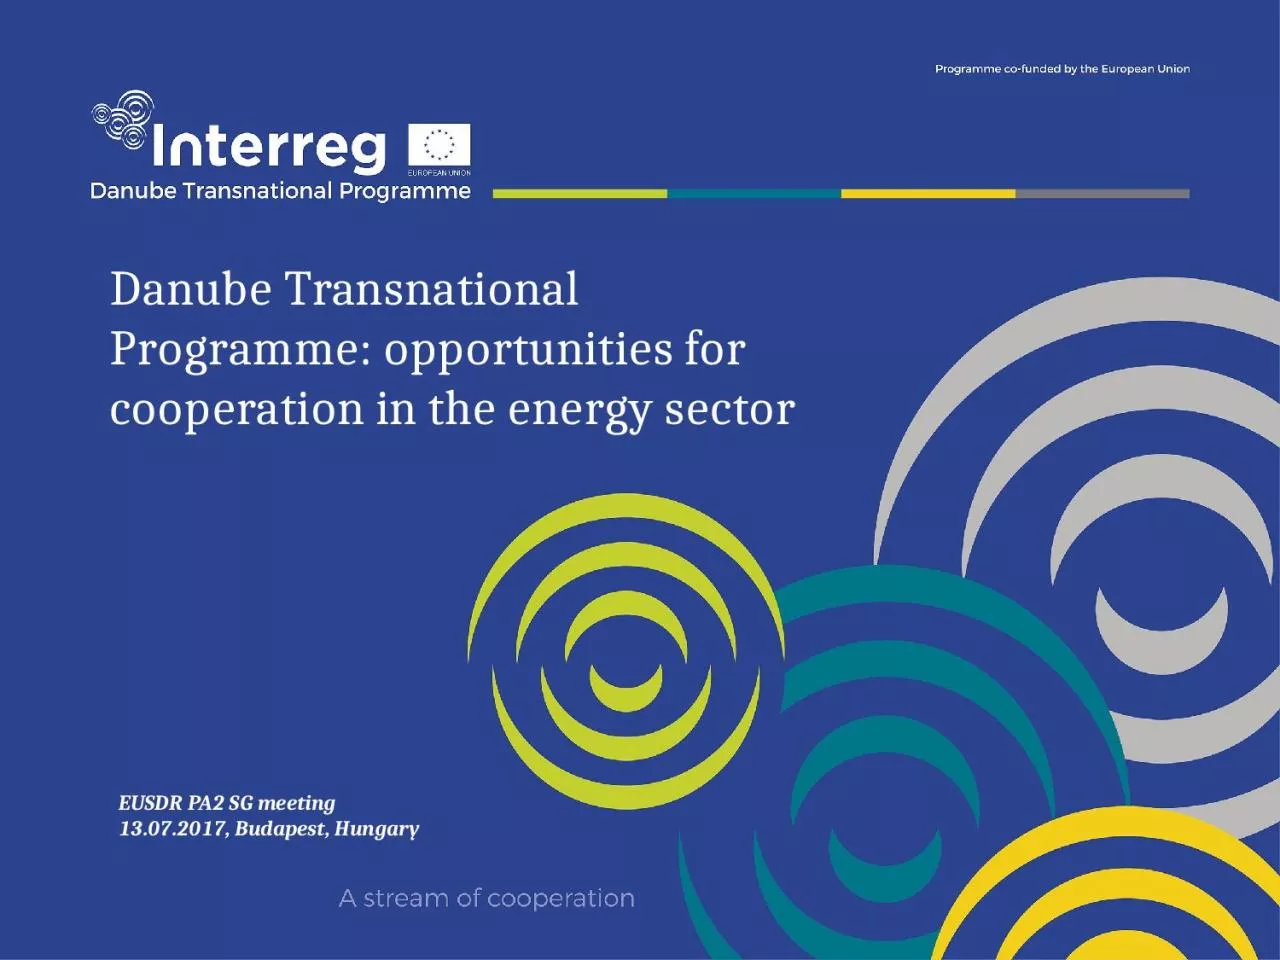 Danube Transnational Programme: opportunities for cooperation in the energy sector